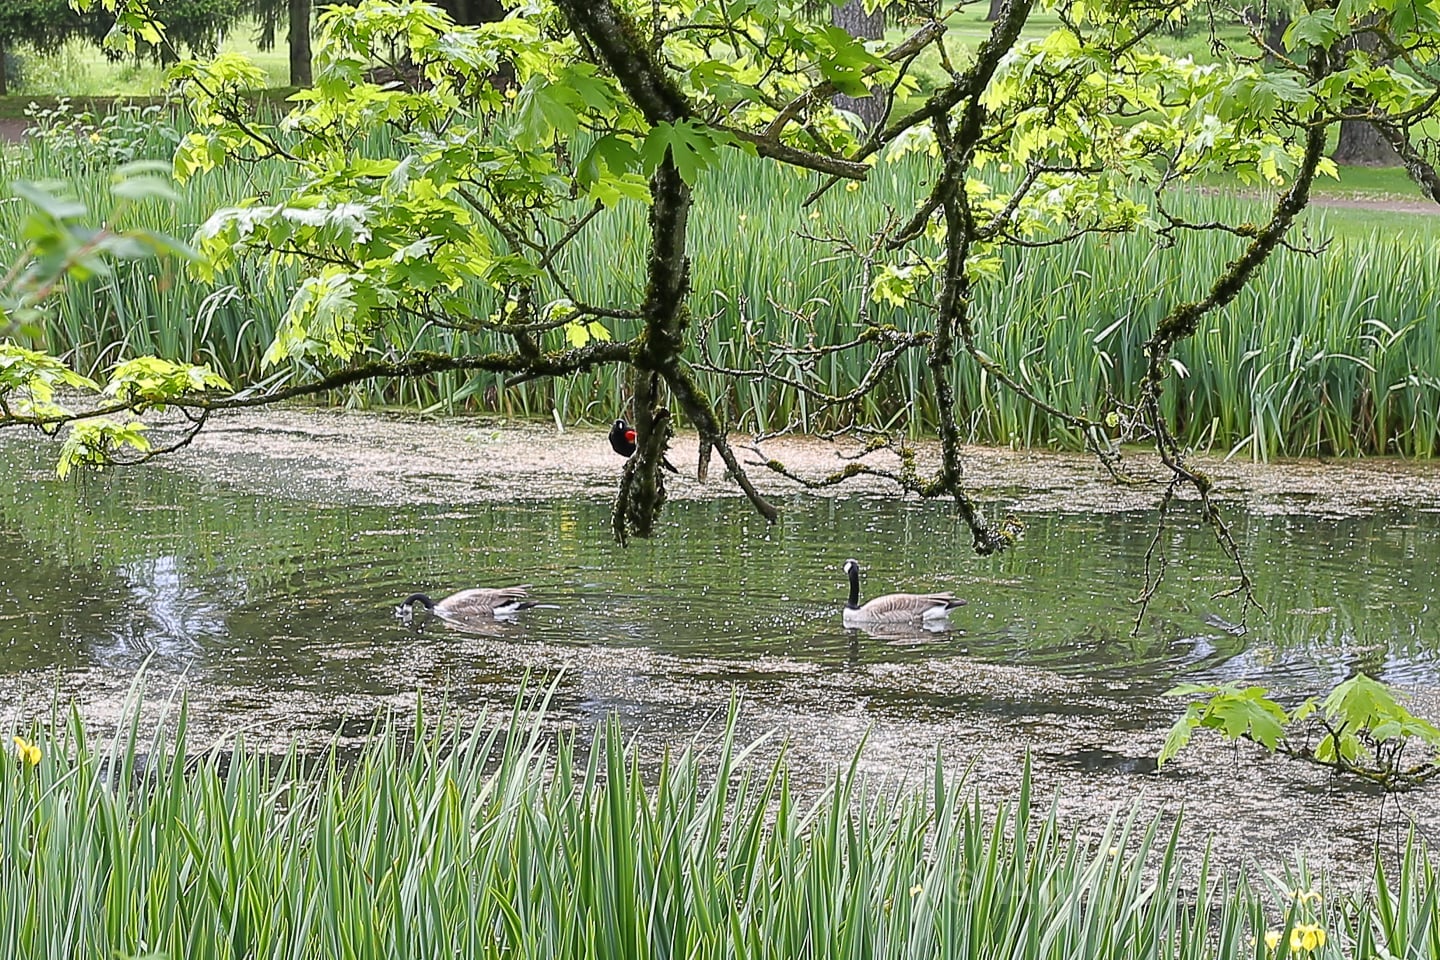 geese in pond at Crystal Springs Rhododendron Garden